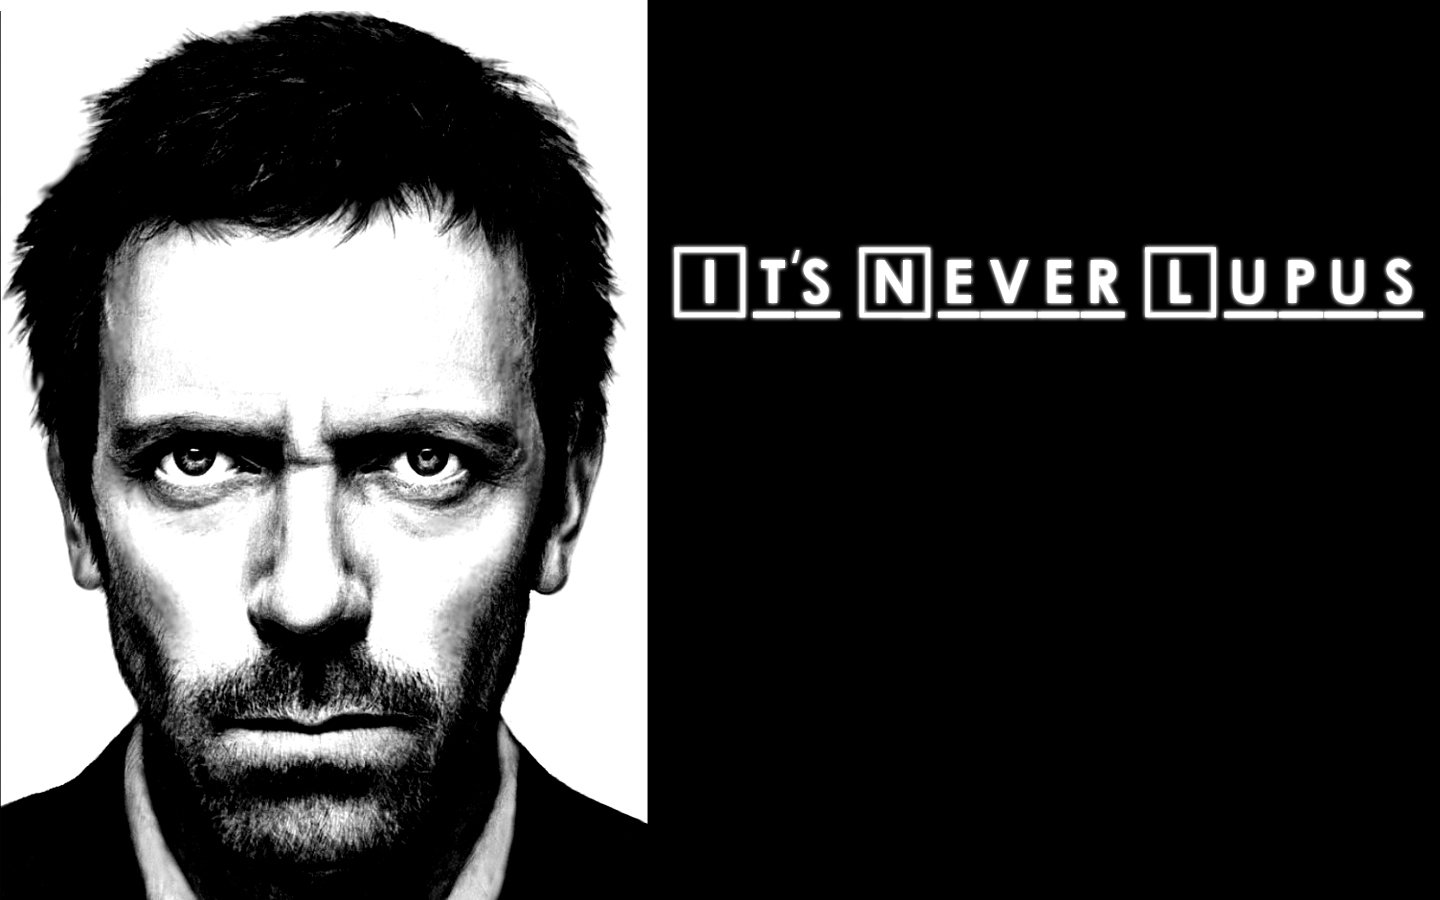 tv show, gregory house, hugh laurie, house